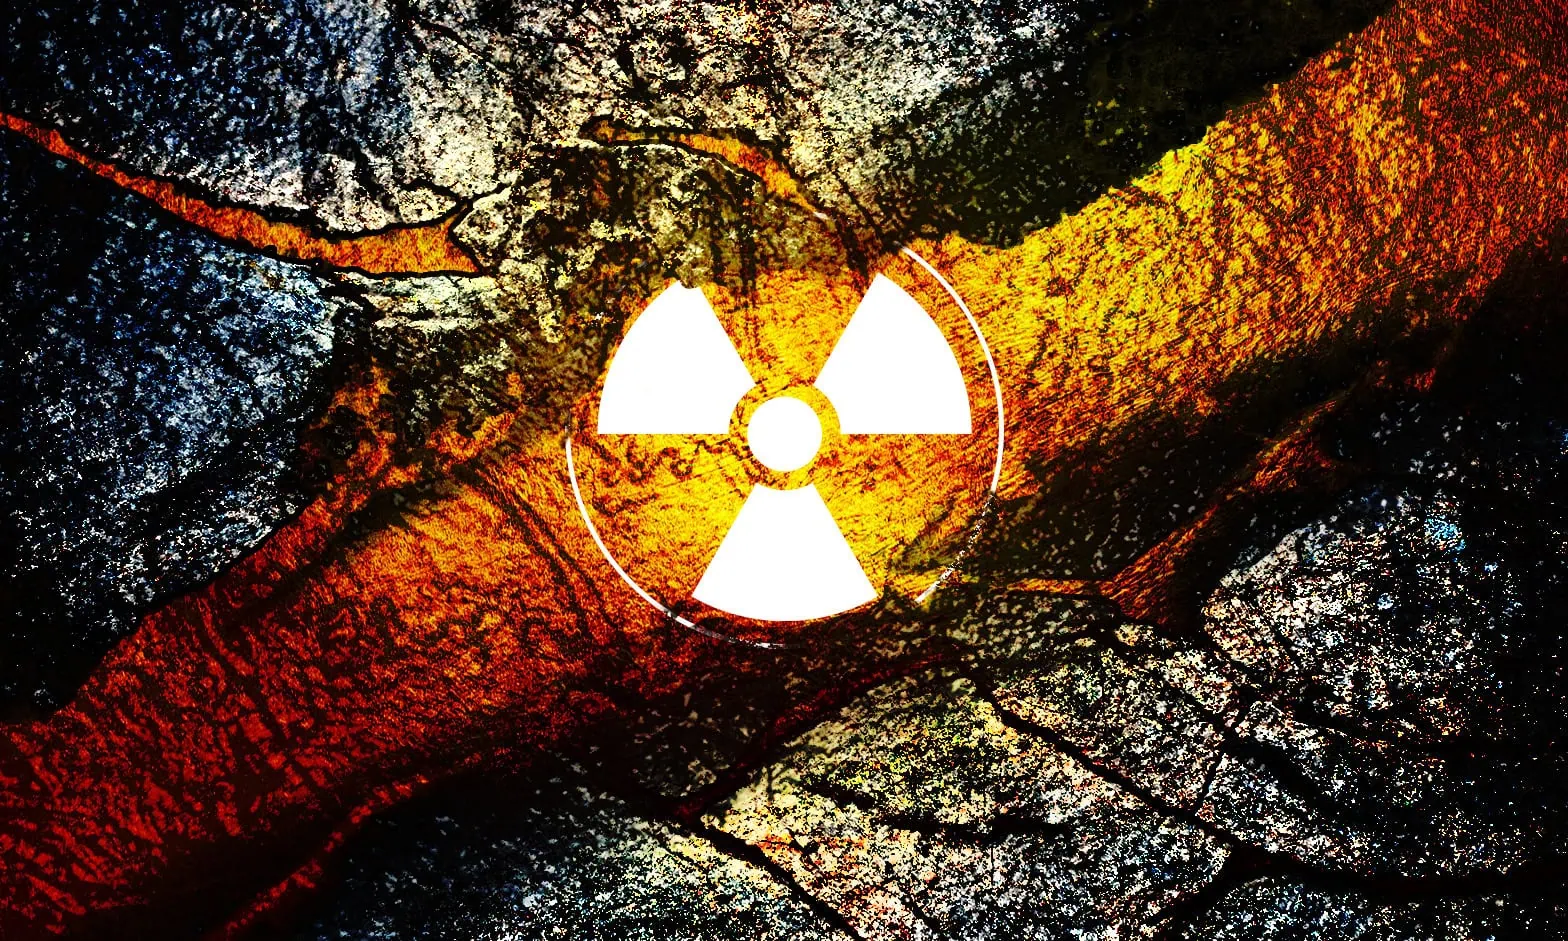 Article Header Design: “Uranium and the Renewal of Nuclear Energy”